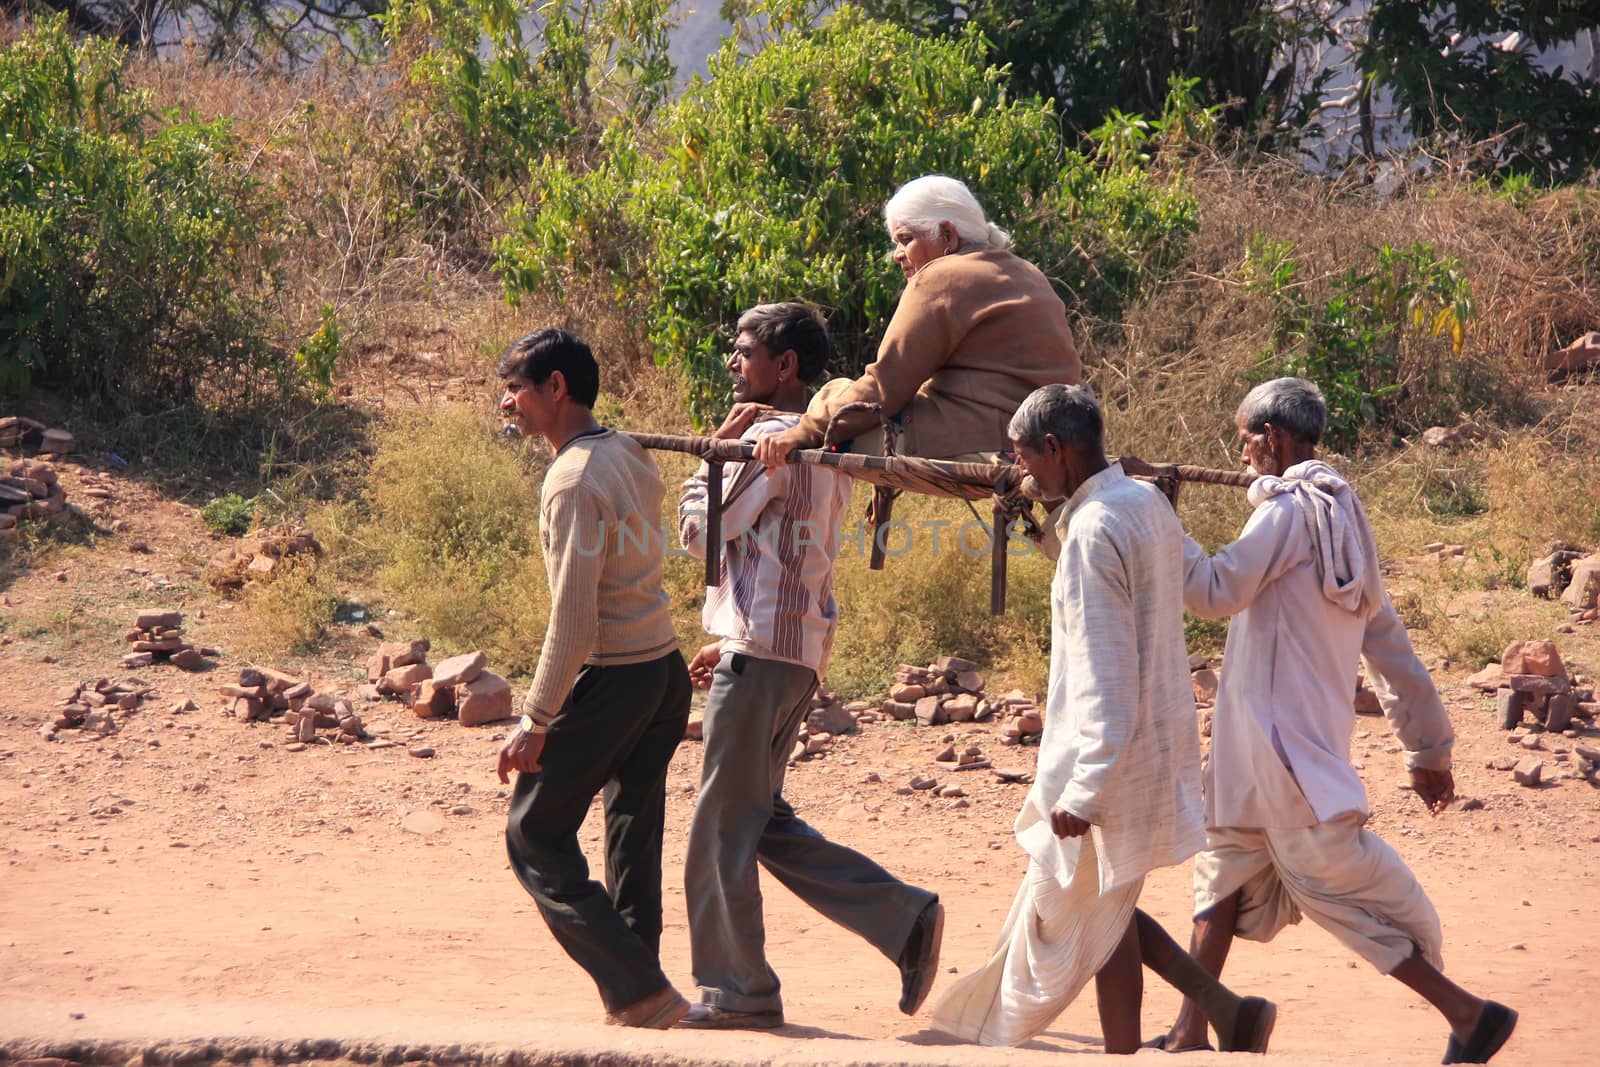 Local men carrying old woman at Ranthambore Fort, India by donya_nedomam